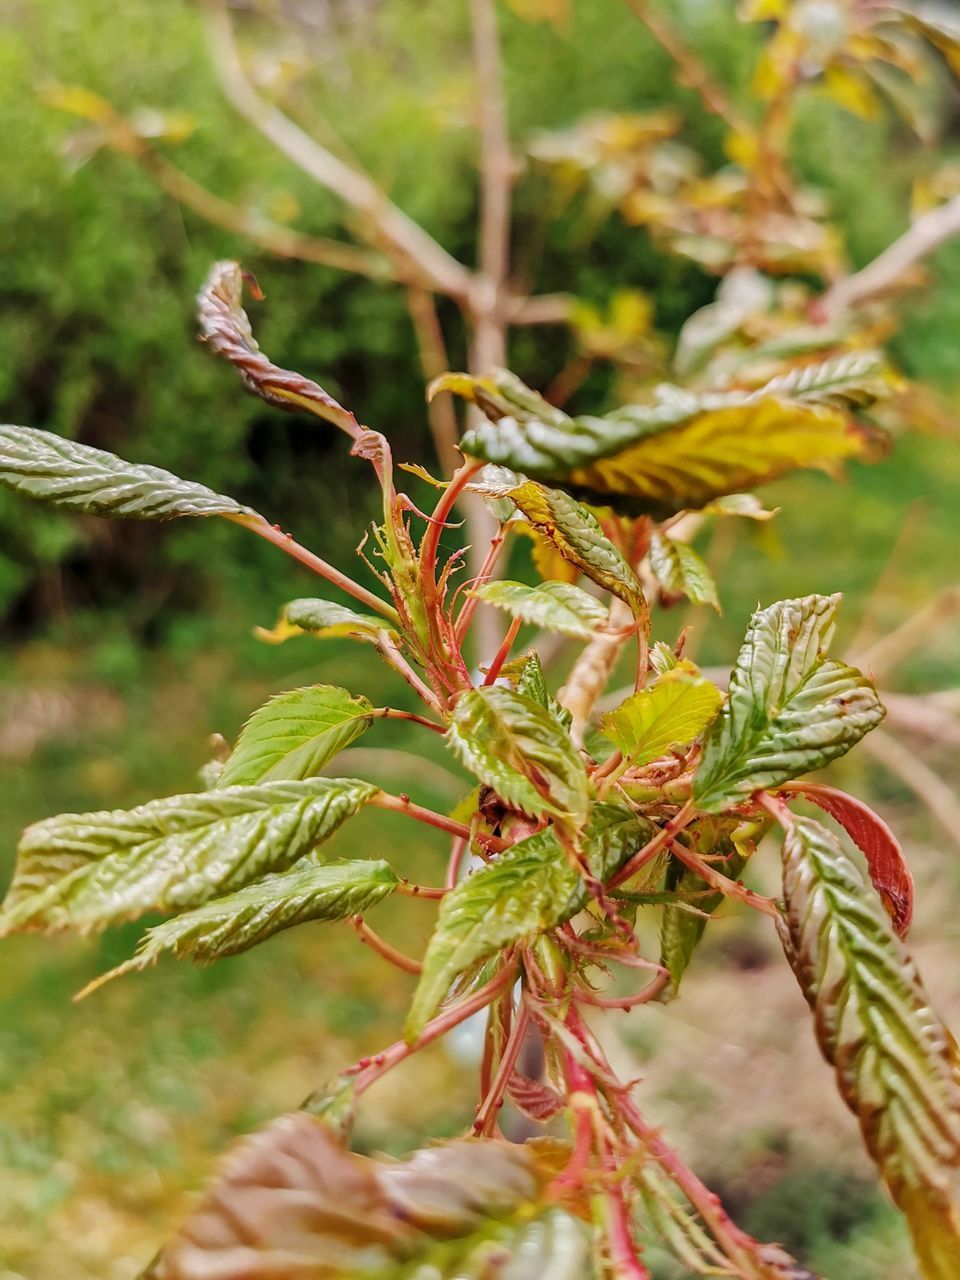 CLOSE-UP OF PLANT ON BRANCH